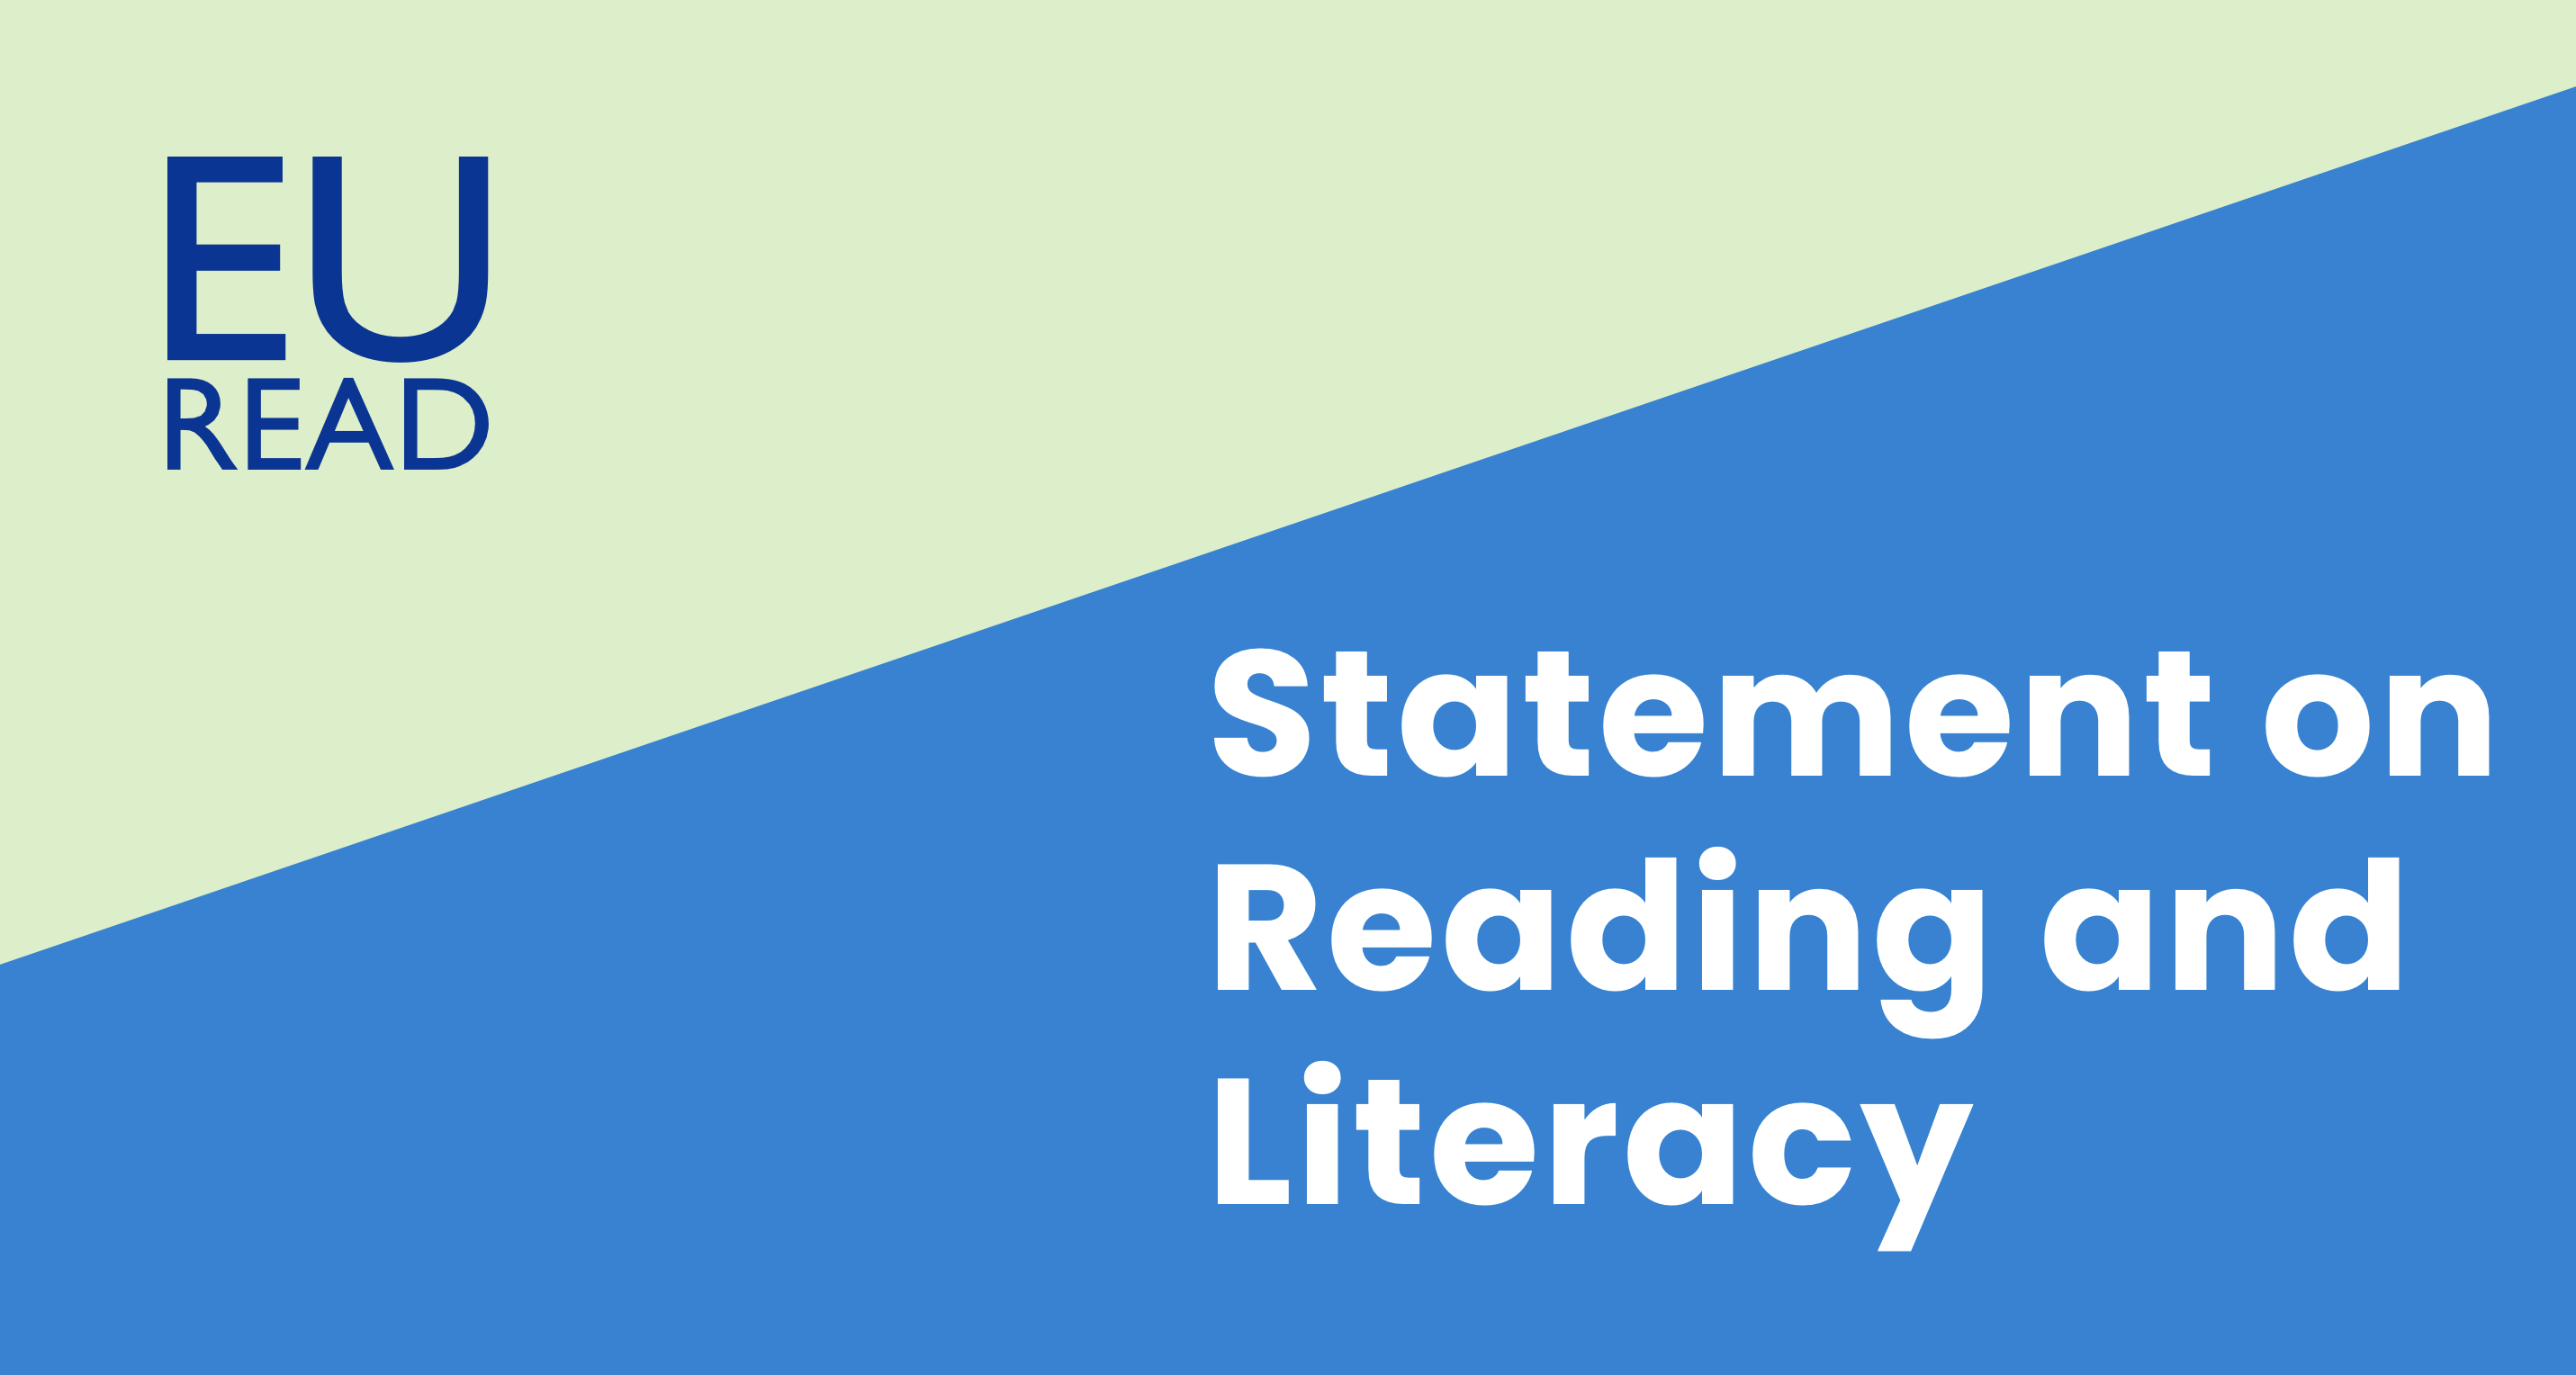 EURead Statement on Reading and Literacy